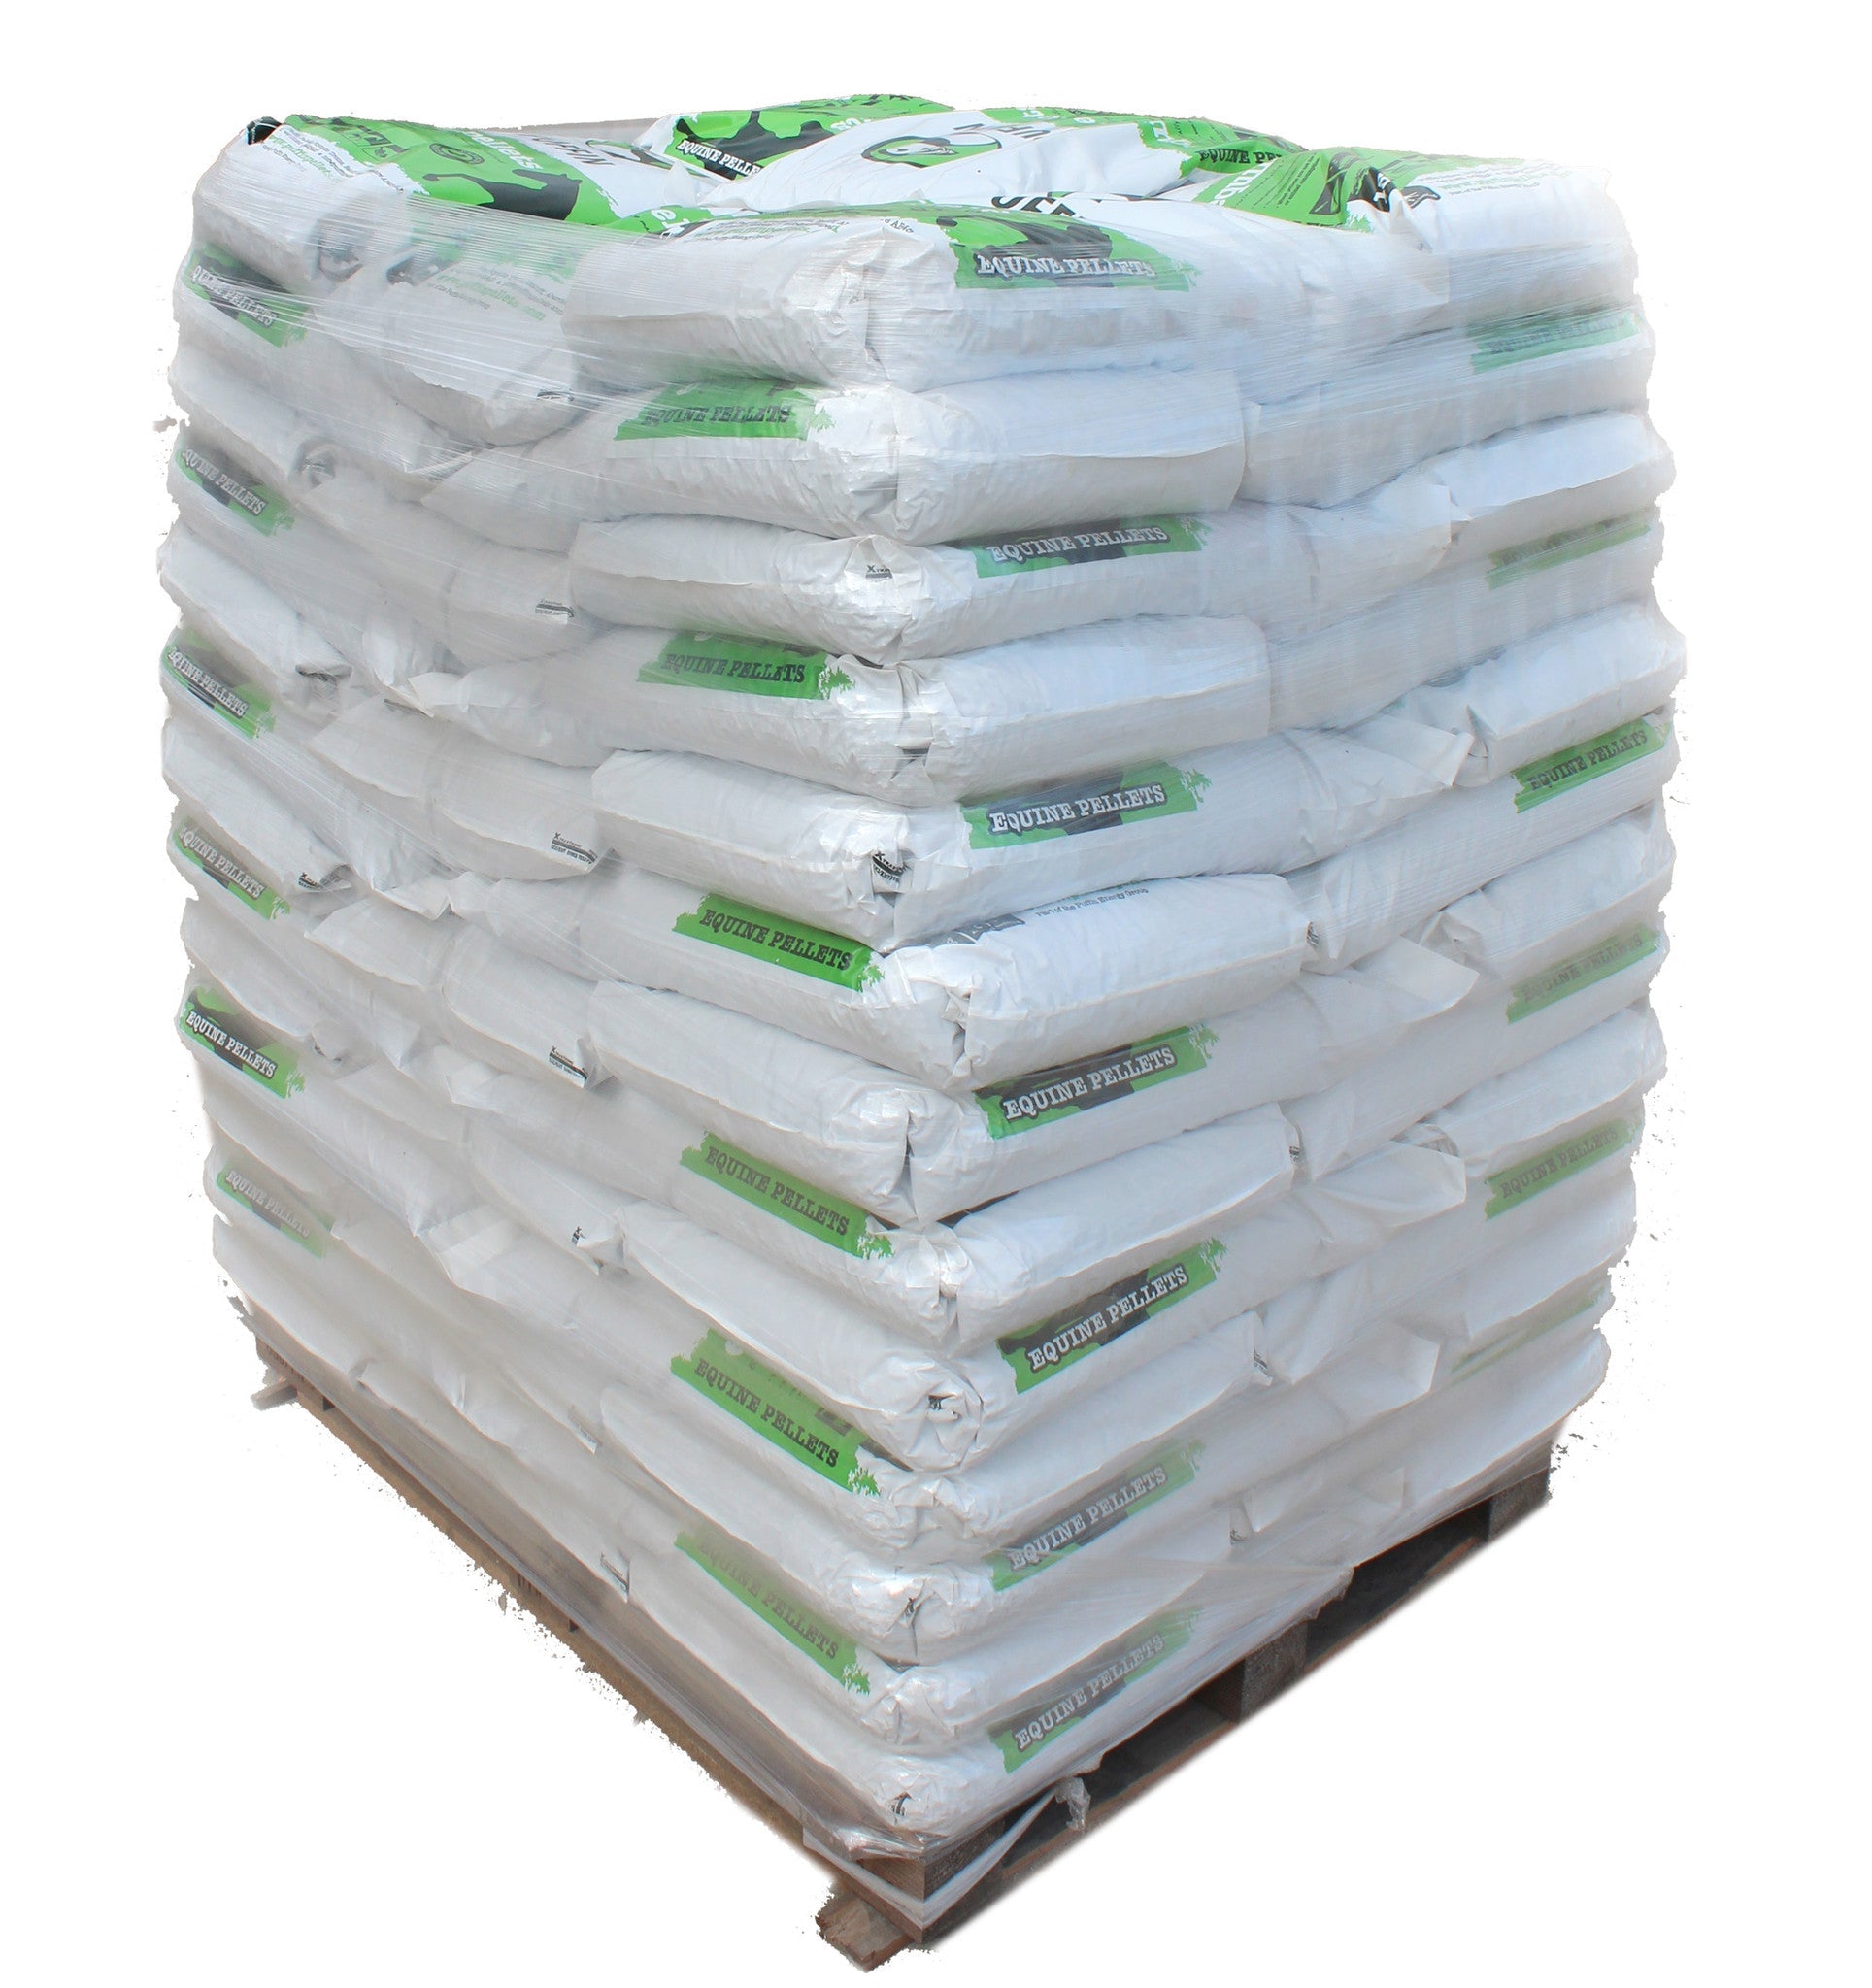 Puffin© Equine Bedding Pellets - 20kg Bags